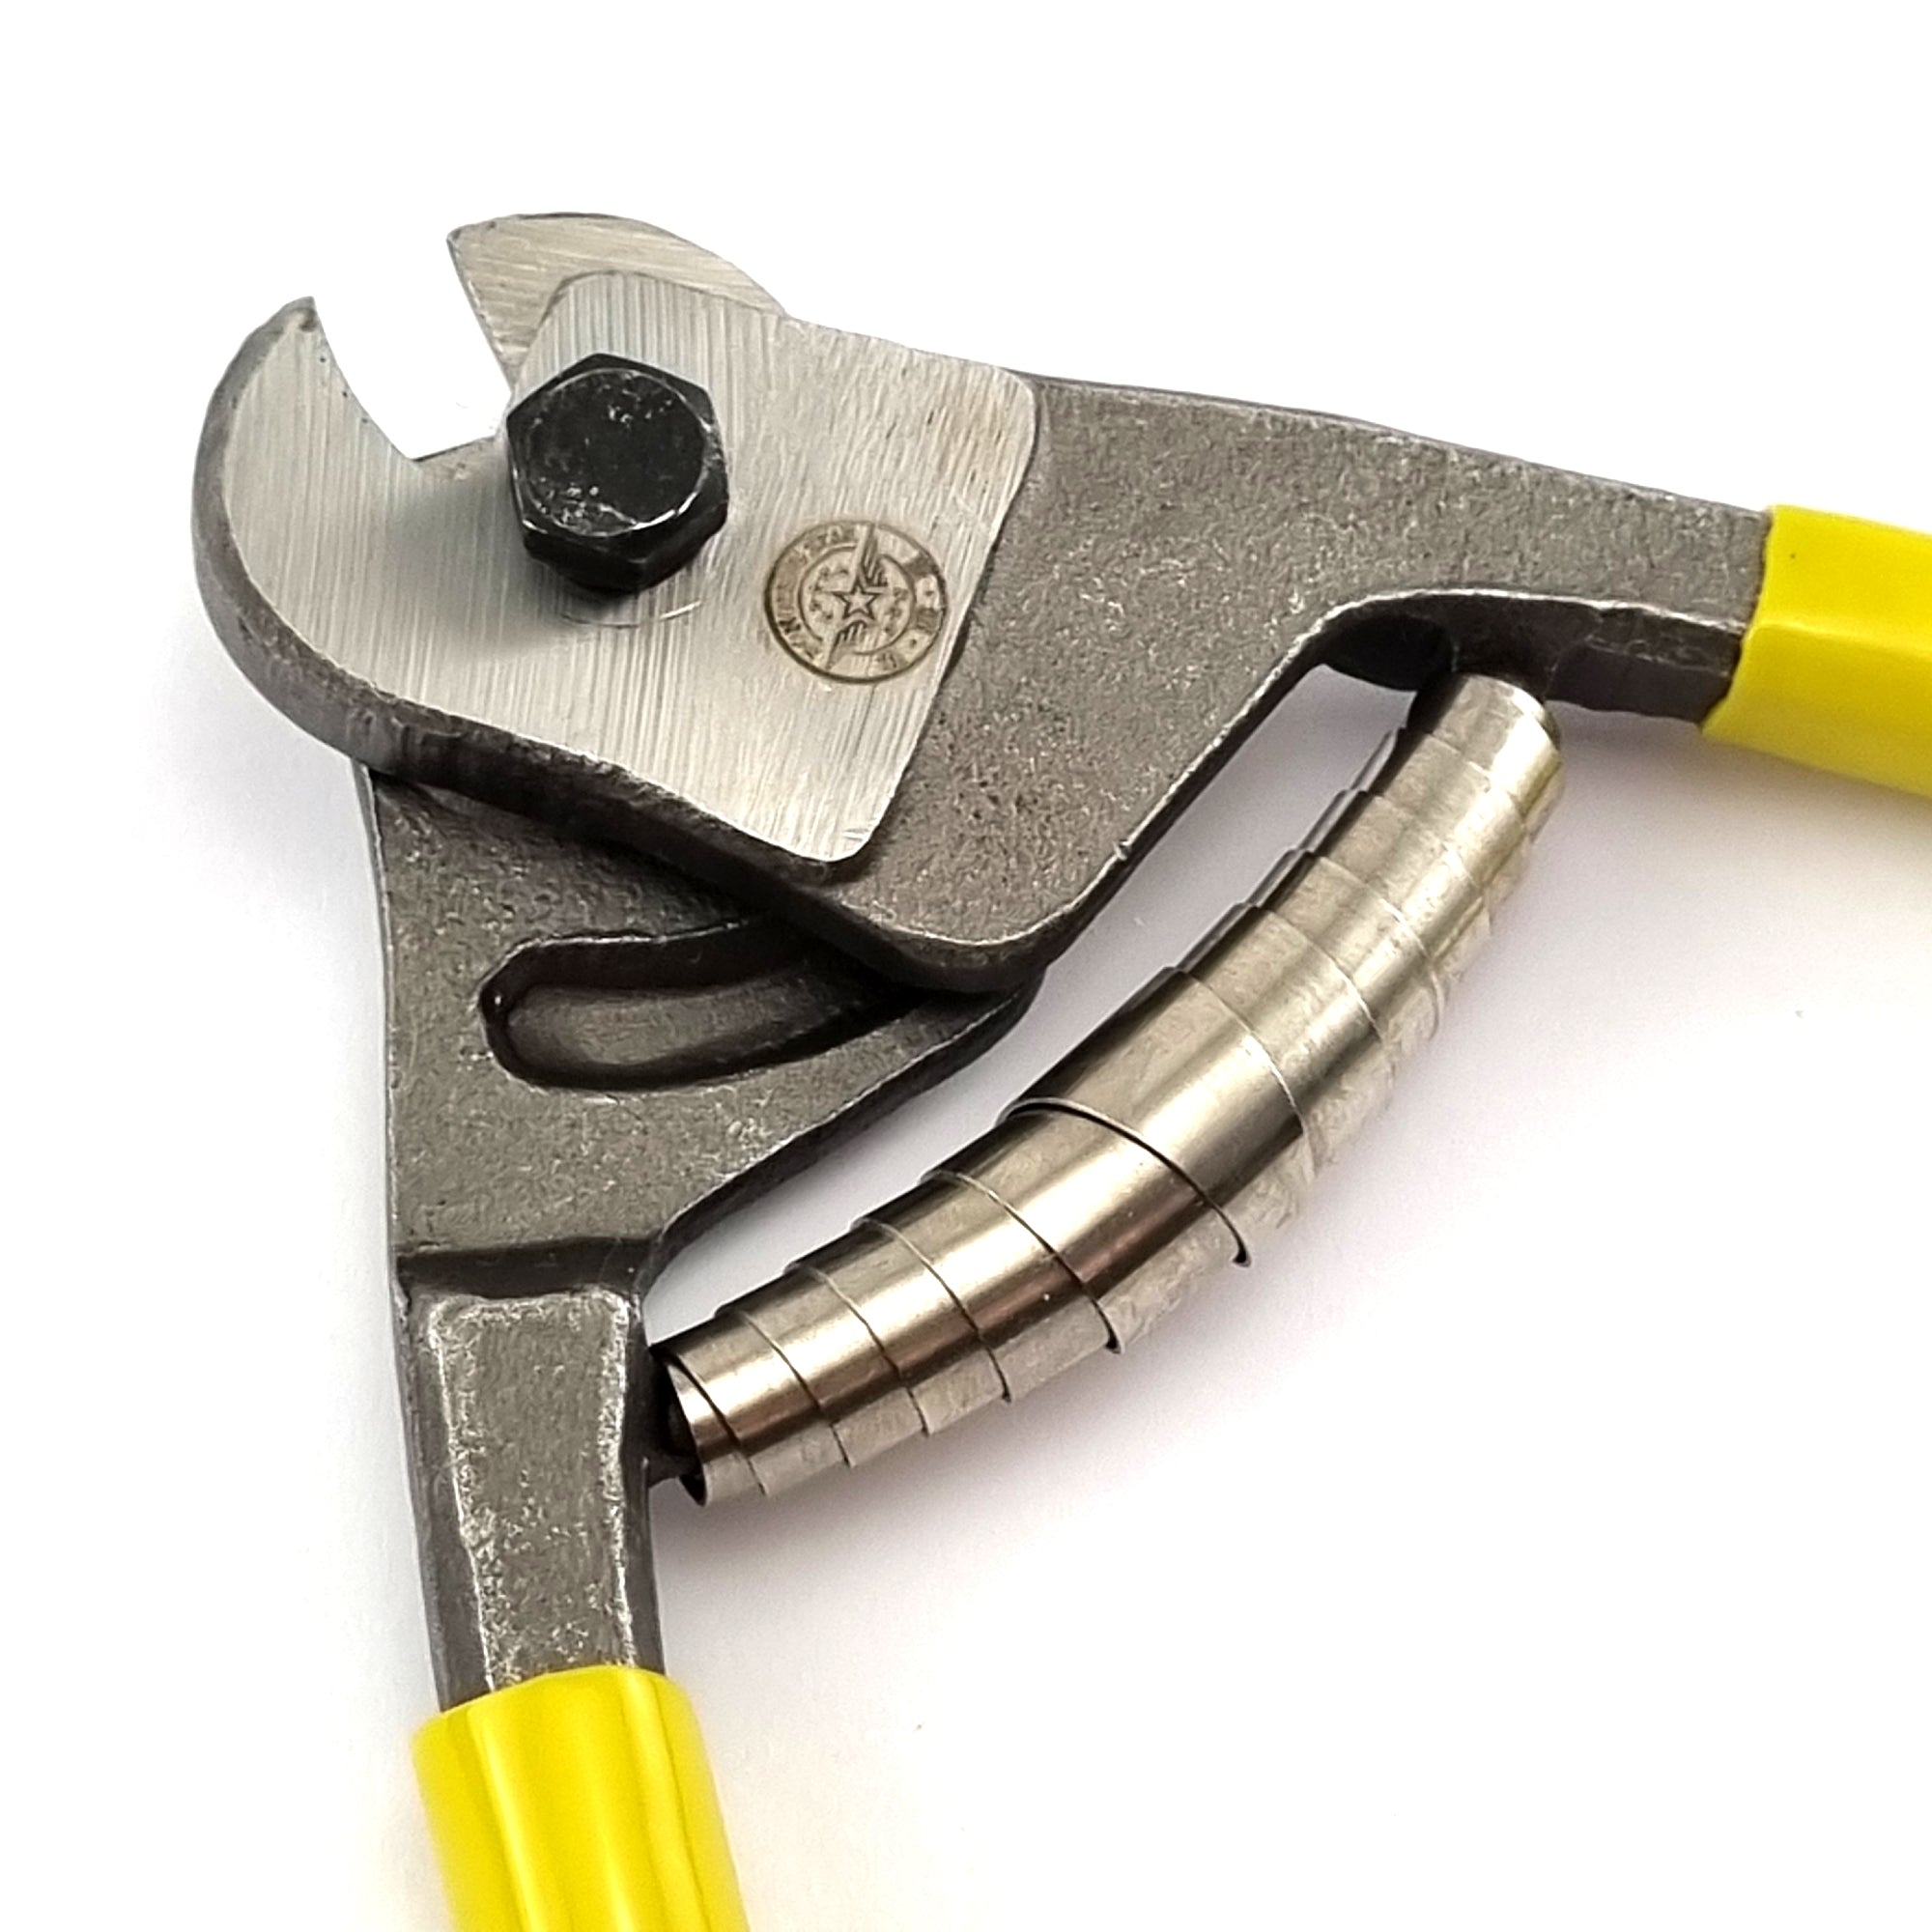 Wire Rope Cutters. Shop tools and hardware online. Australia wide shipping. Chain.com.au